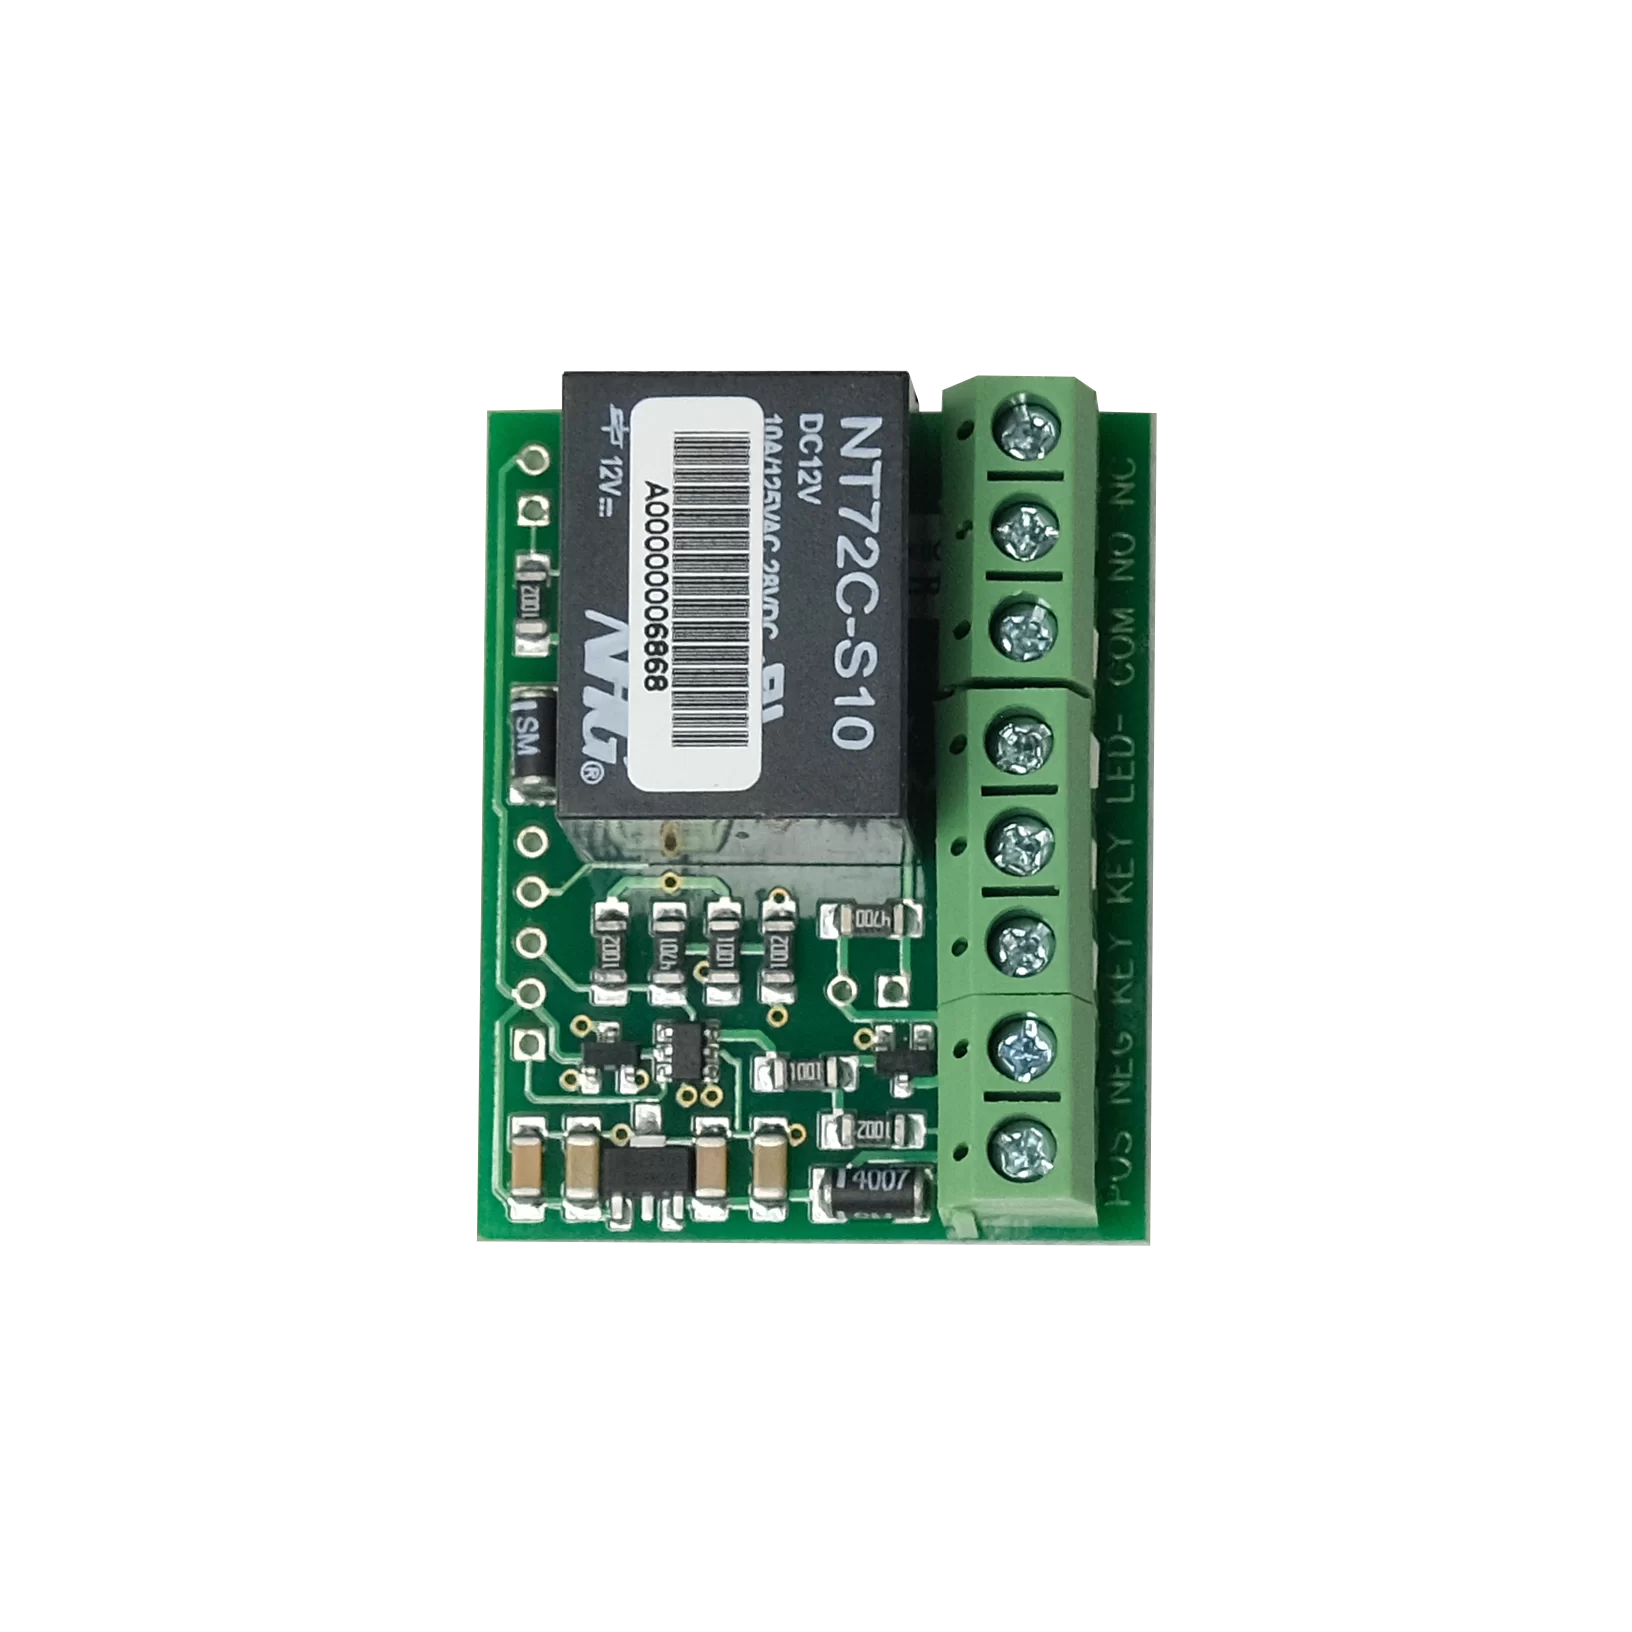 STEPPER RELAY CLUTCH RELAY WITH EXTERNAL LED INDICATION 12VDC COIL INPUT